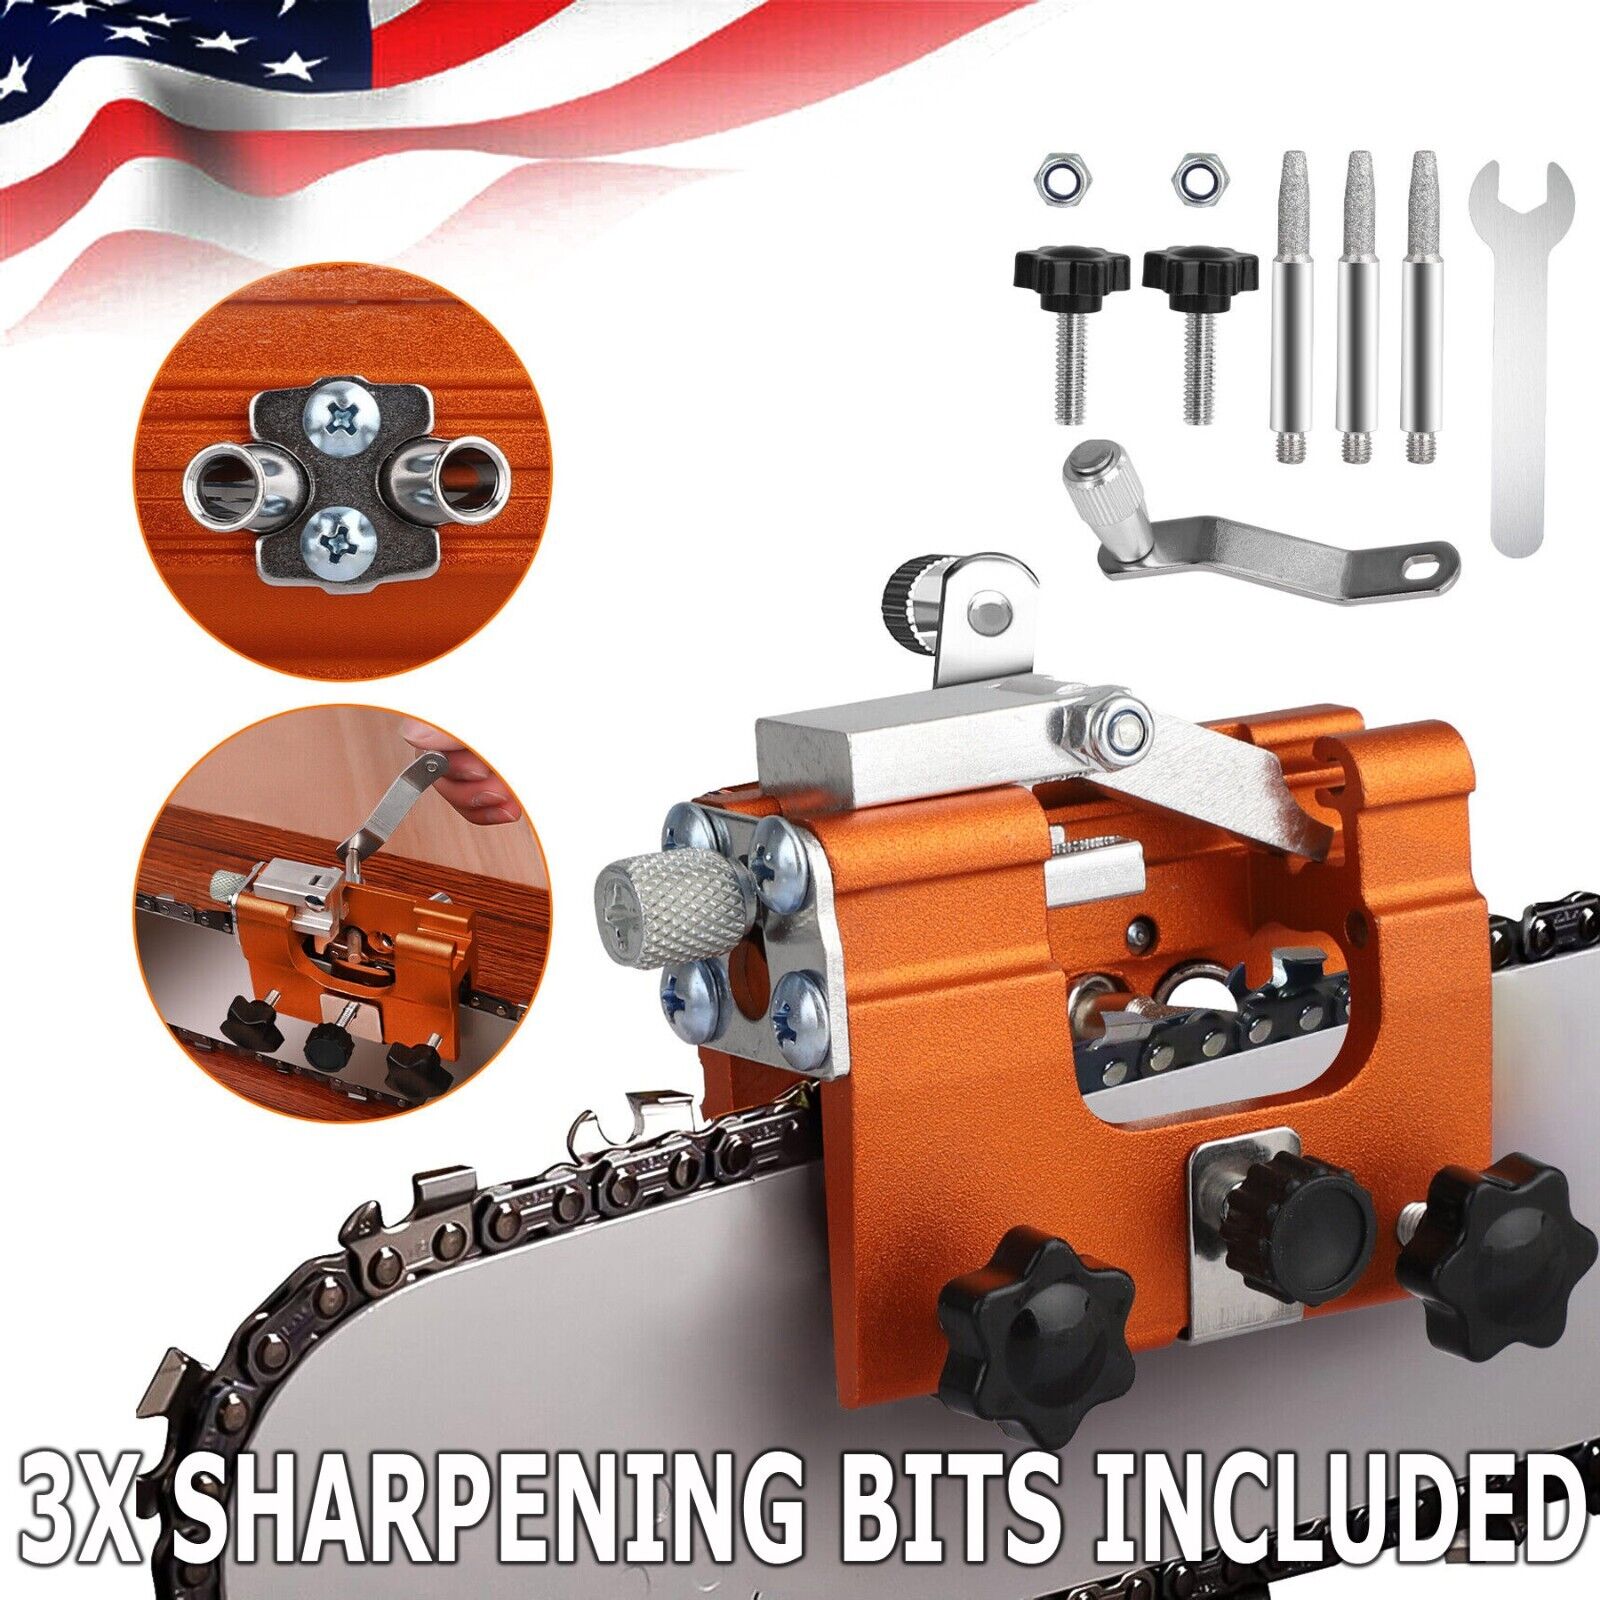 thinkstar Portable Chainsaw Sharpening Jig Sharpener Kit For 12-20" Chainsaw &Electric Saw